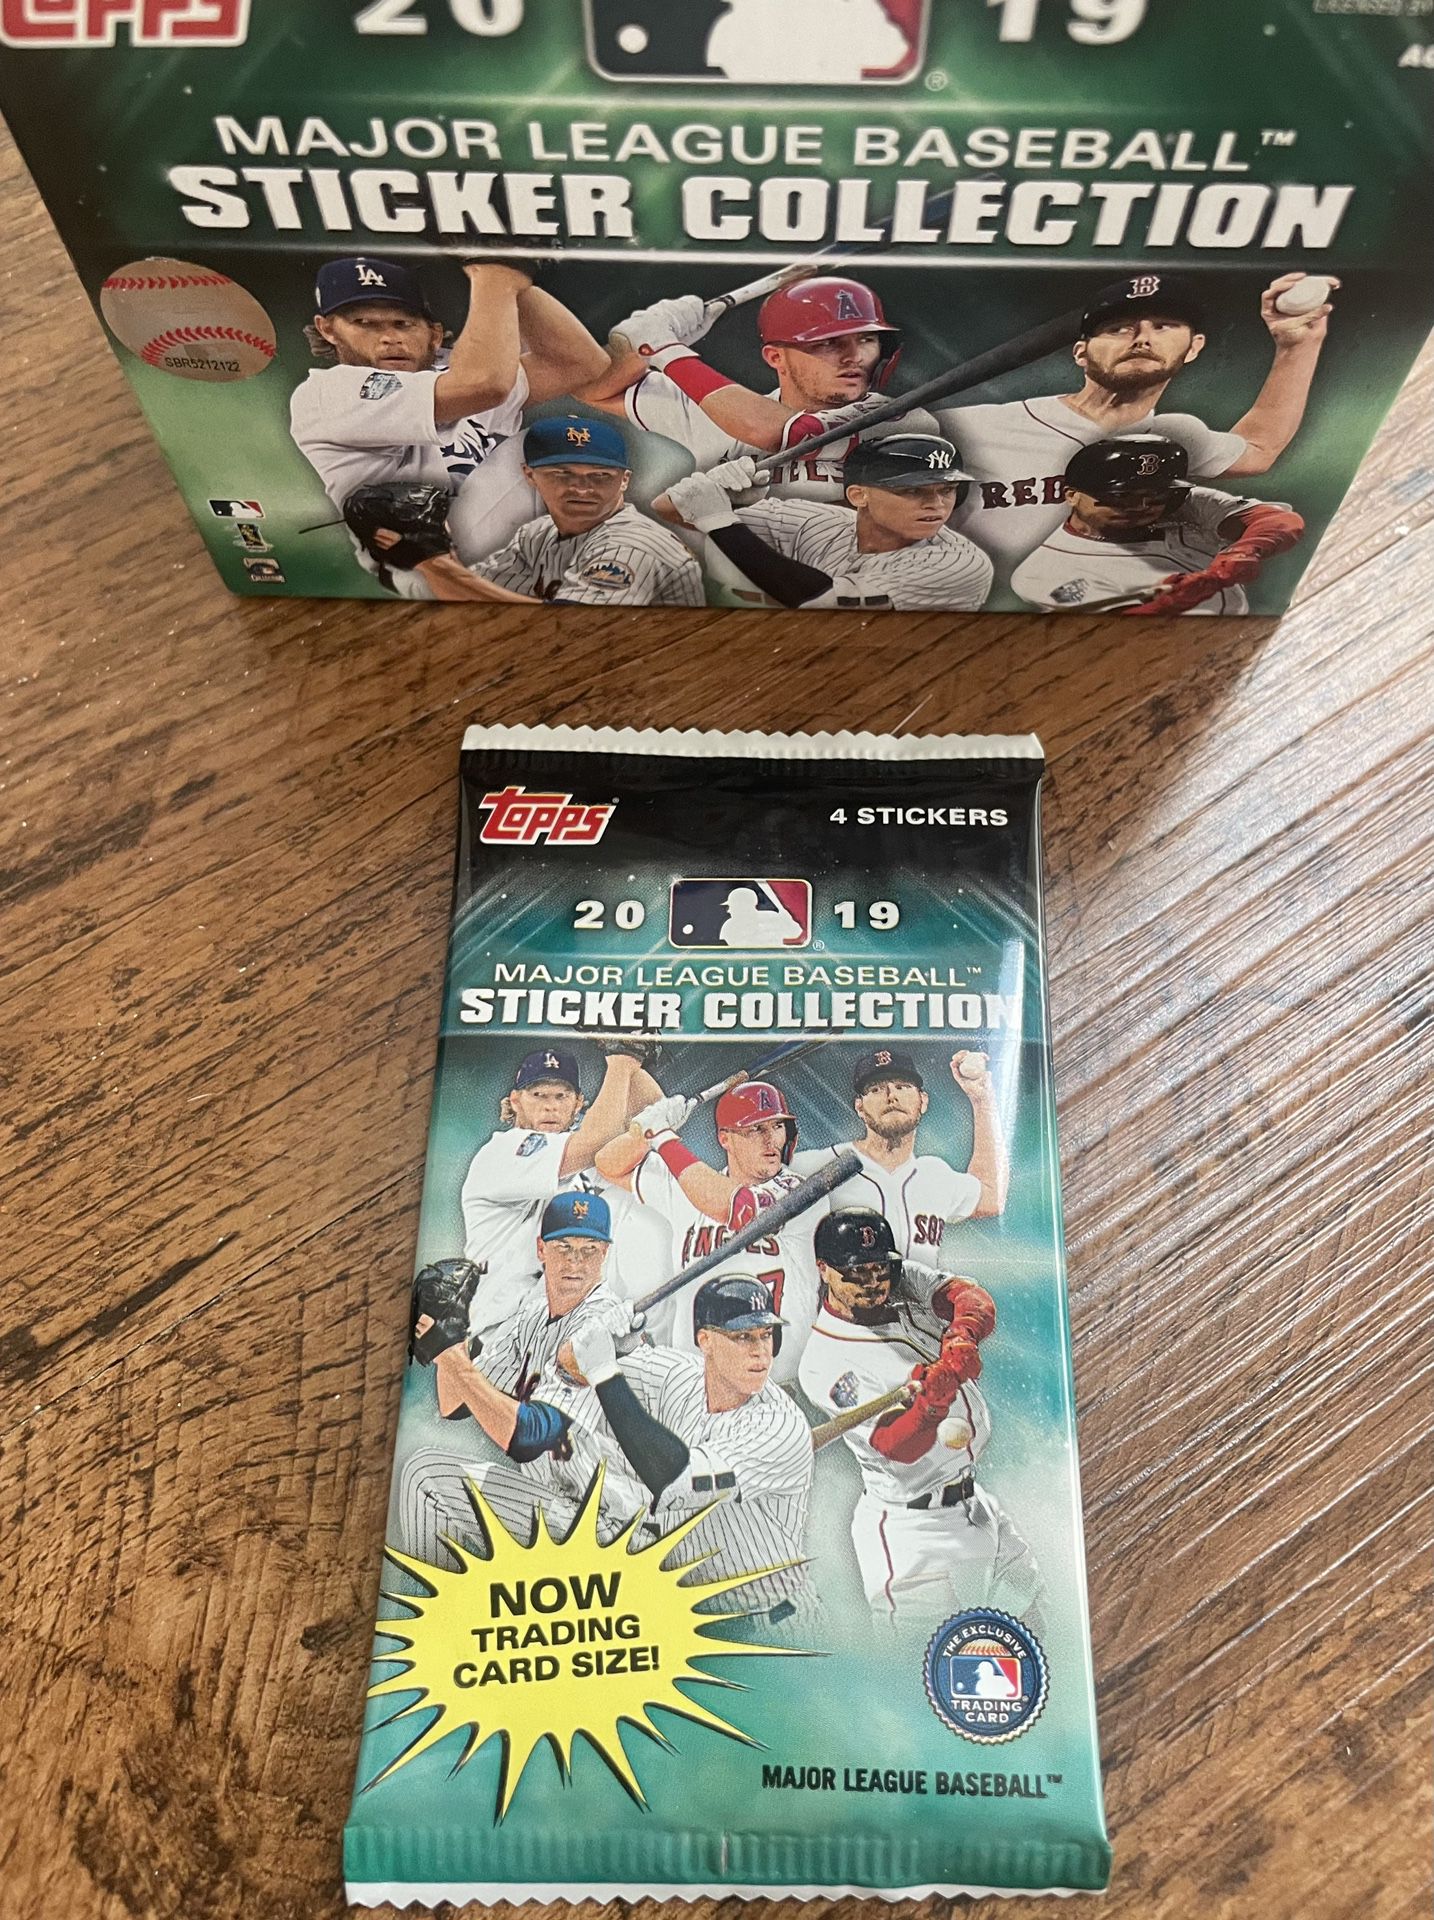 1 factory Sealed Pack 2019 Topps MLB Baseball Sticker Collection - 4 sticker cards per pack  Fernando Tatis Jr.  rookie - San Diego Padres RC? 